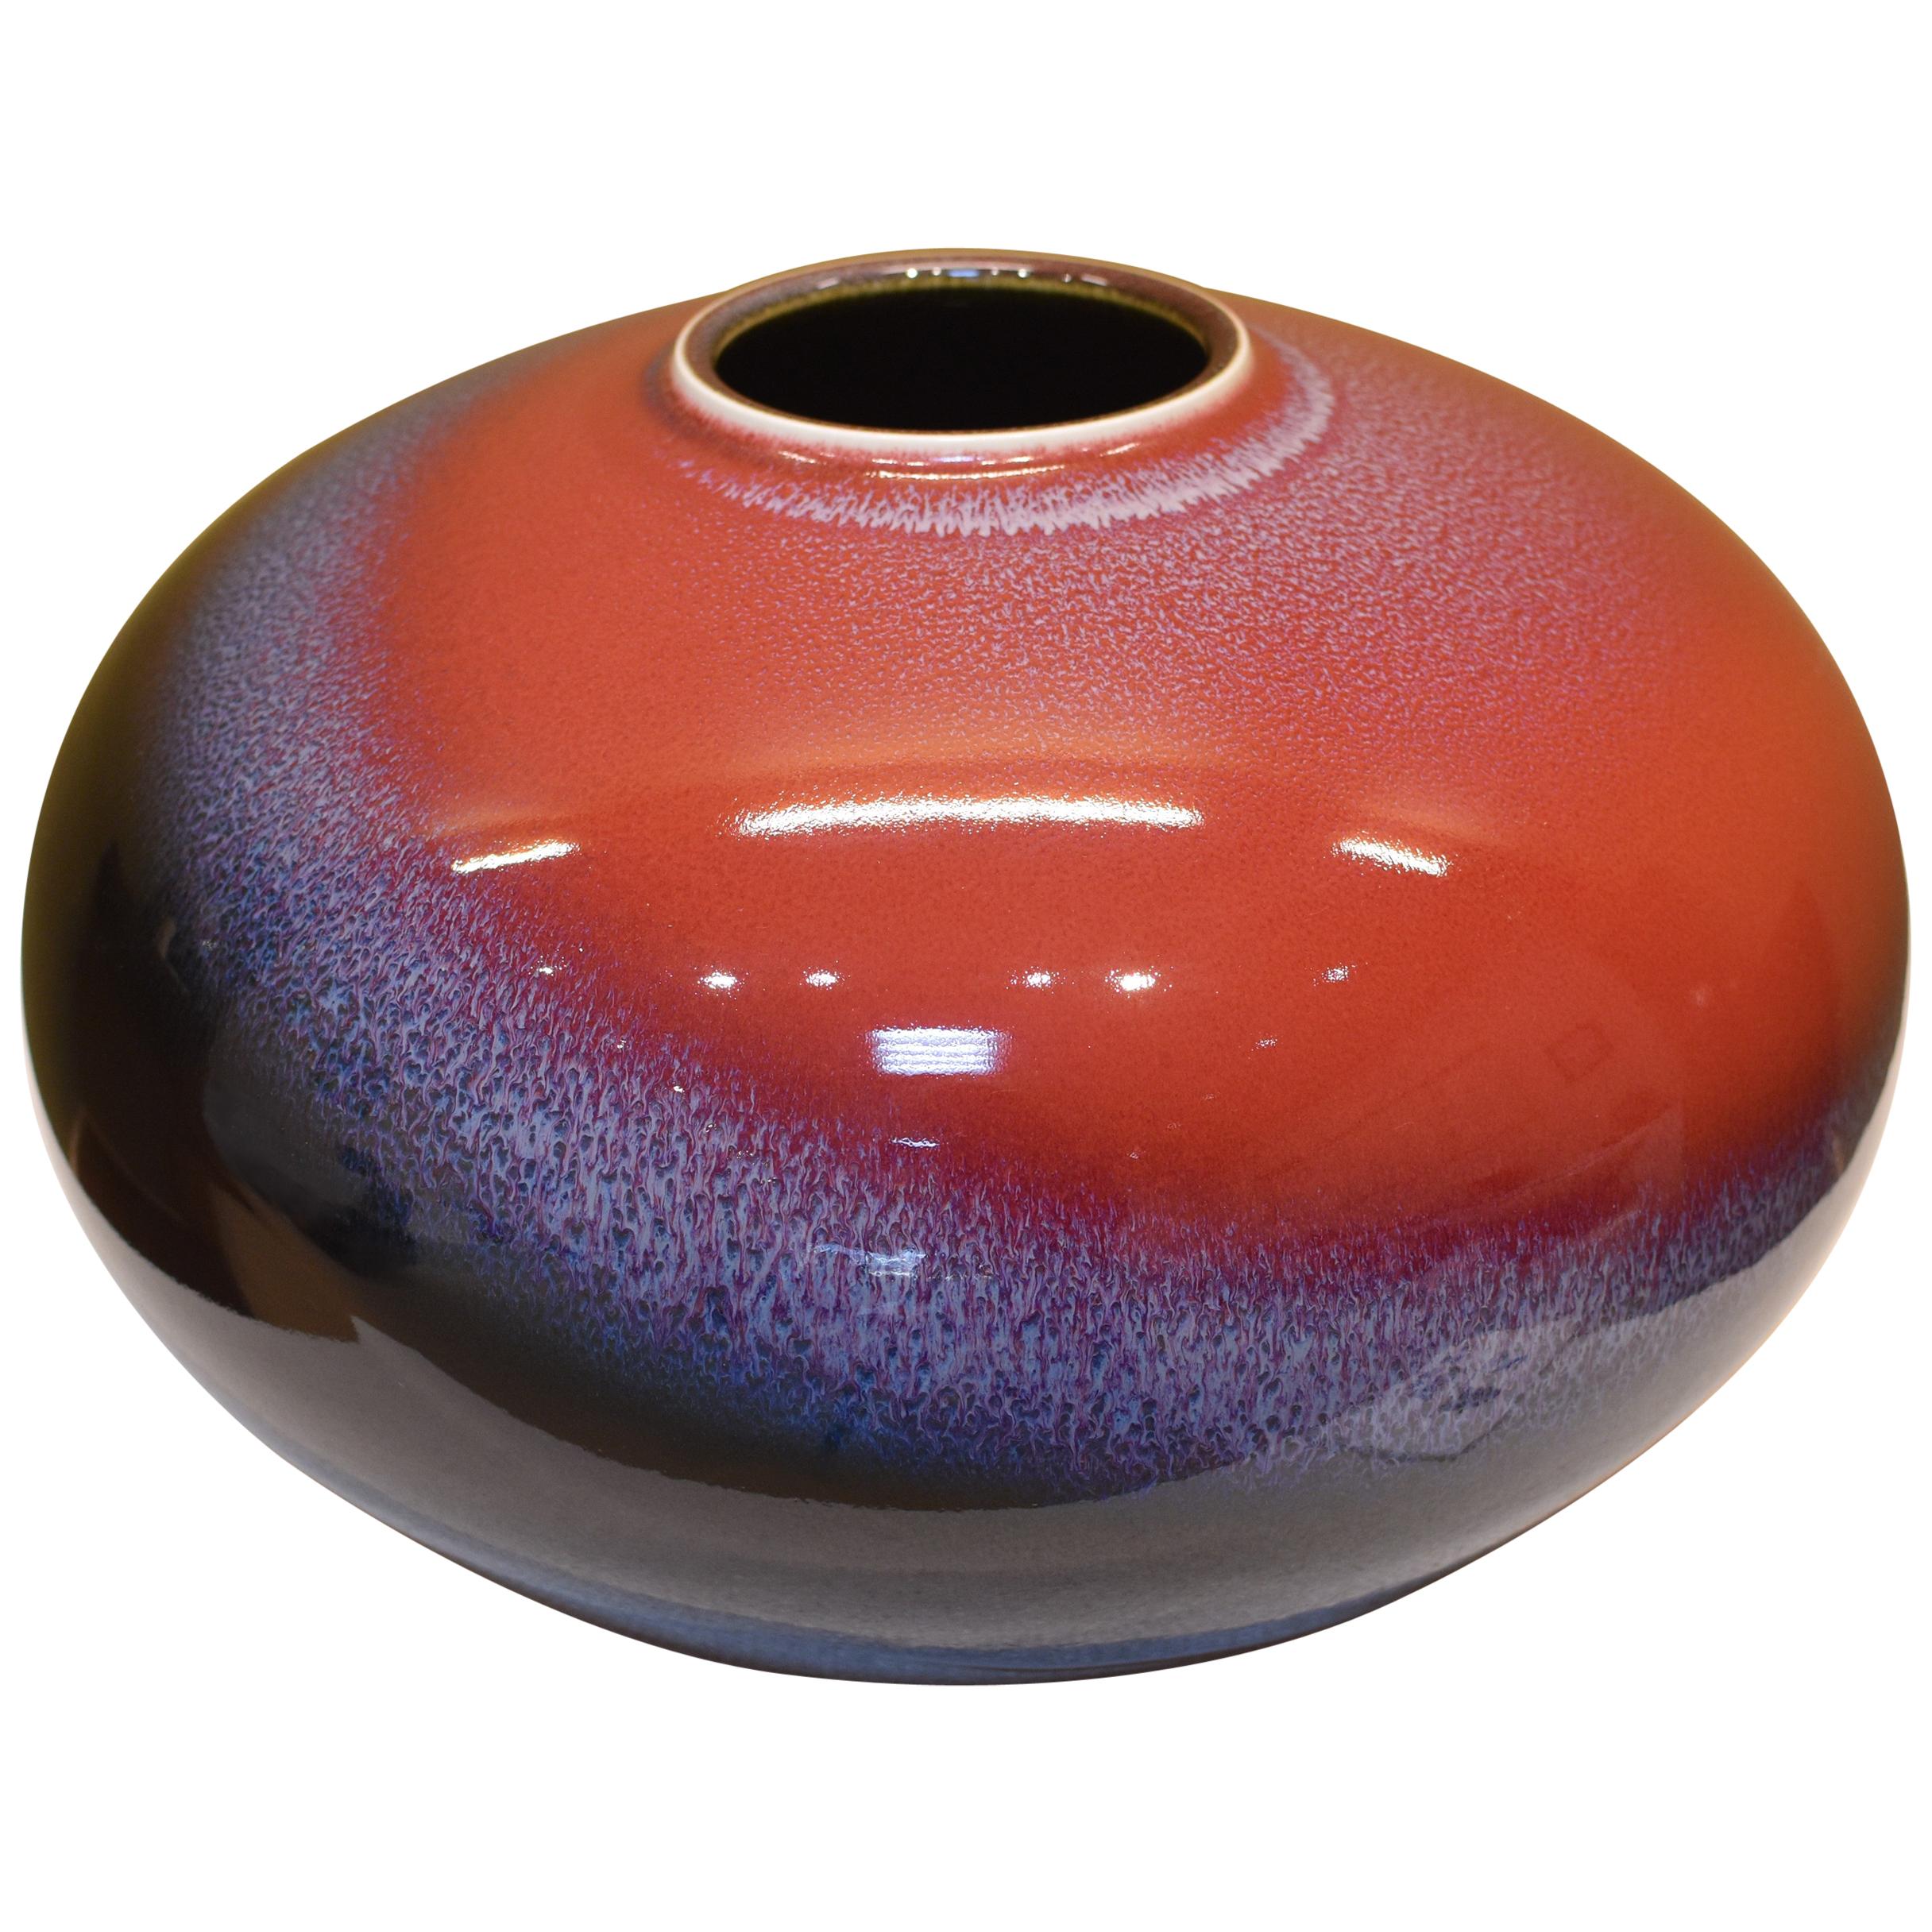 Japanese Contemporary Red Black Hand-Glazed Porcelain Vase by Master Artist, 2 In New Condition For Sale In Takarazuka, JP